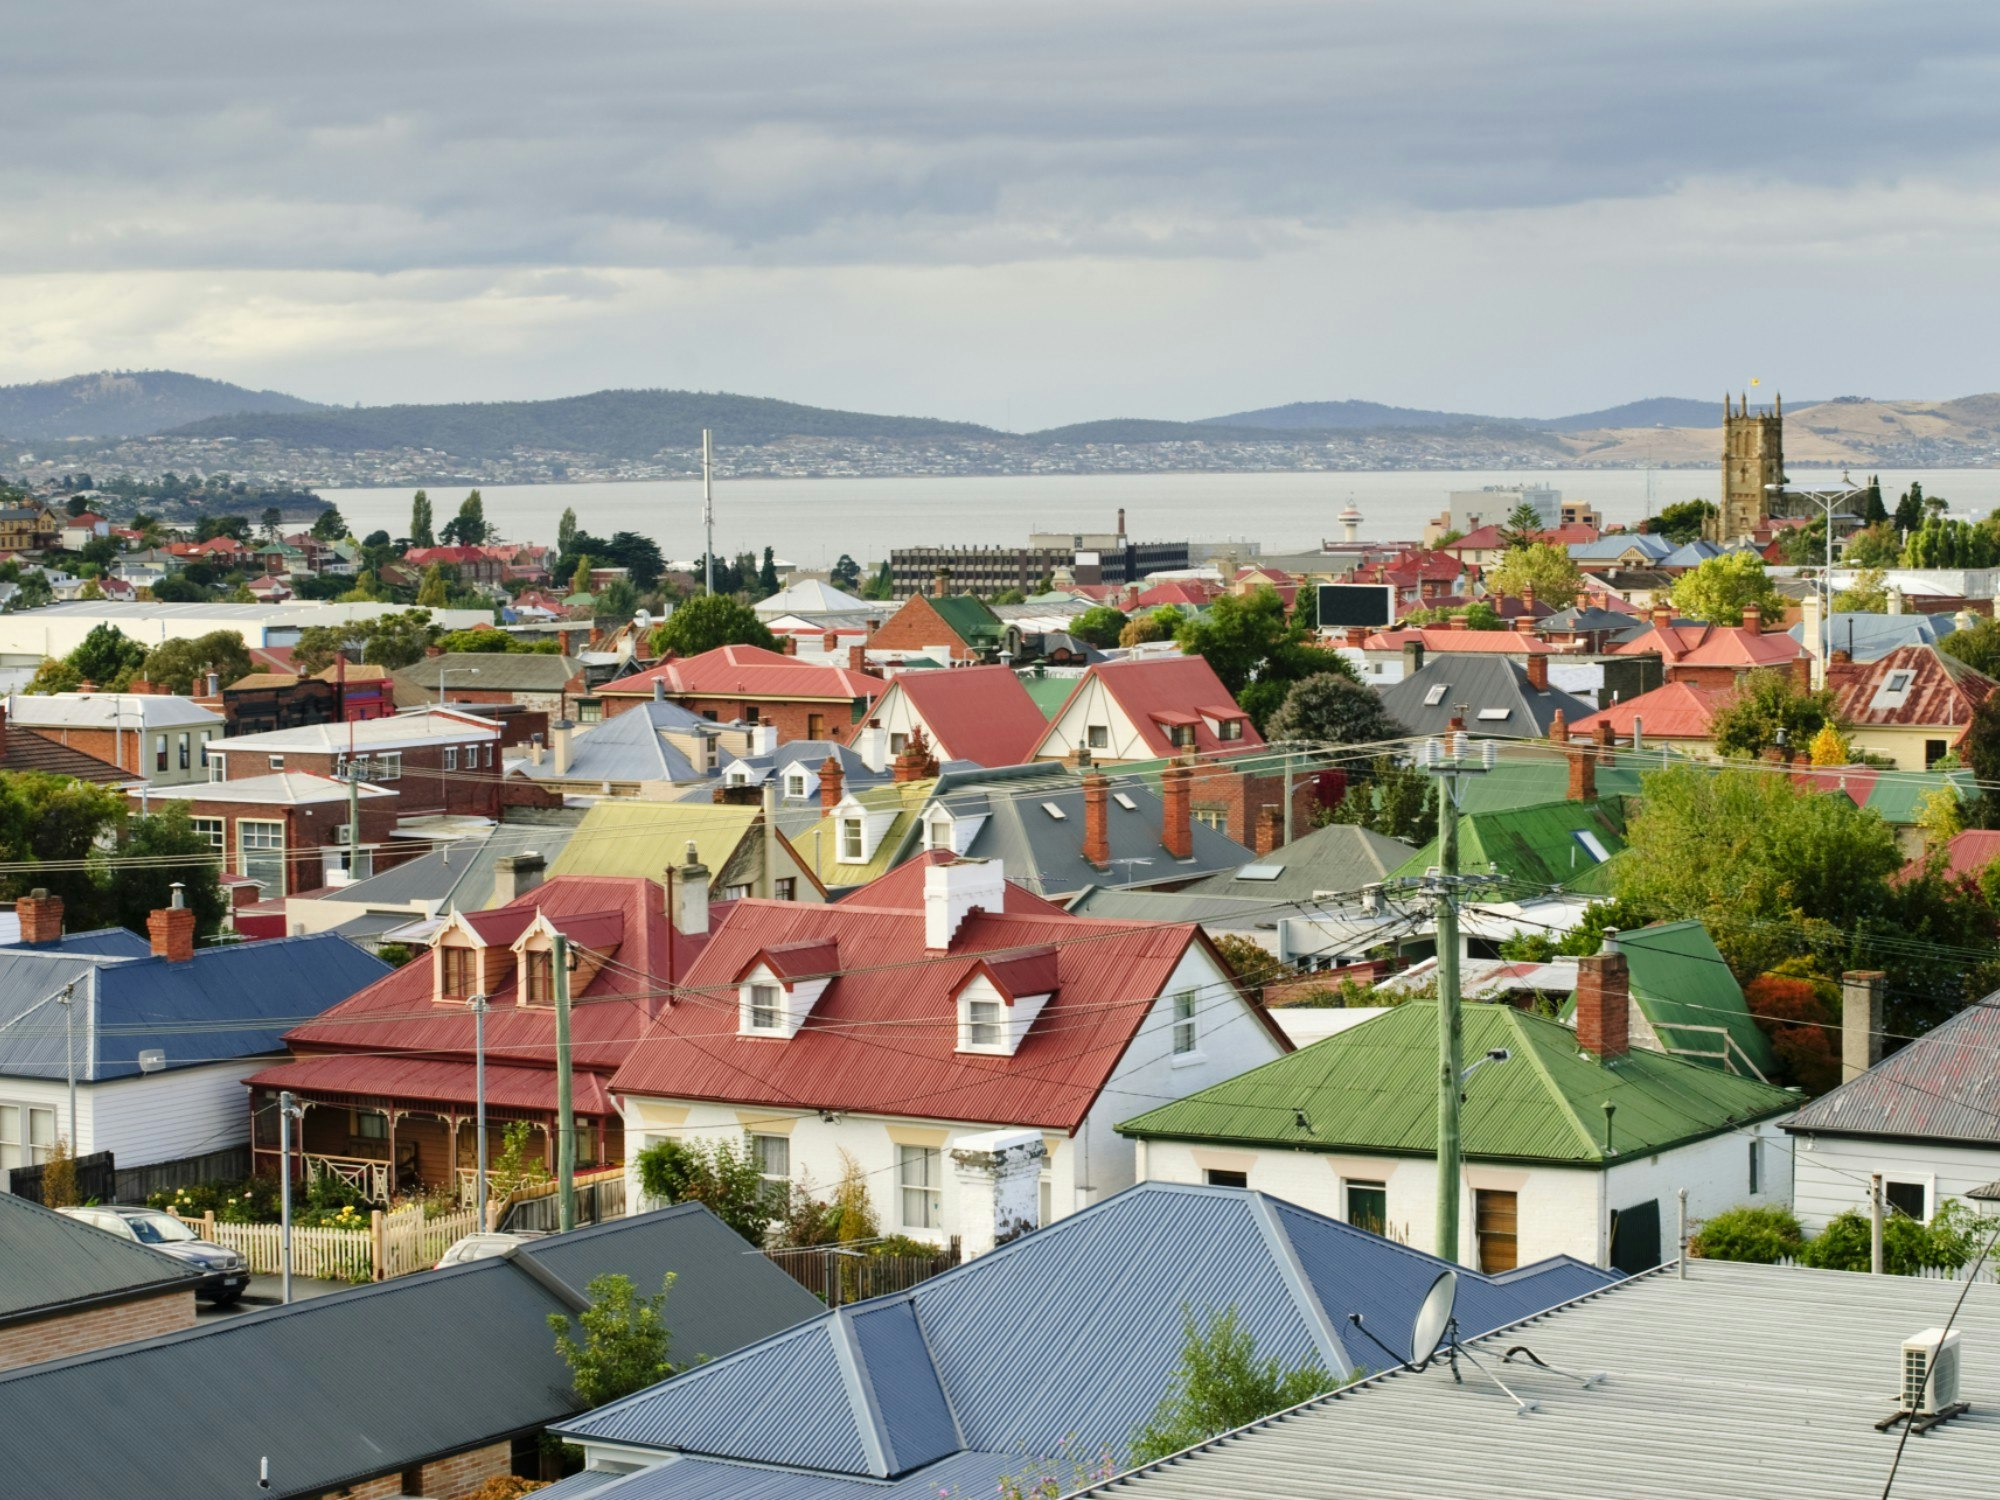 <p>About 20,000 Australians lives in group homes, but the rates of incidents reported are too high. [Source: Shutterstock]</p>
